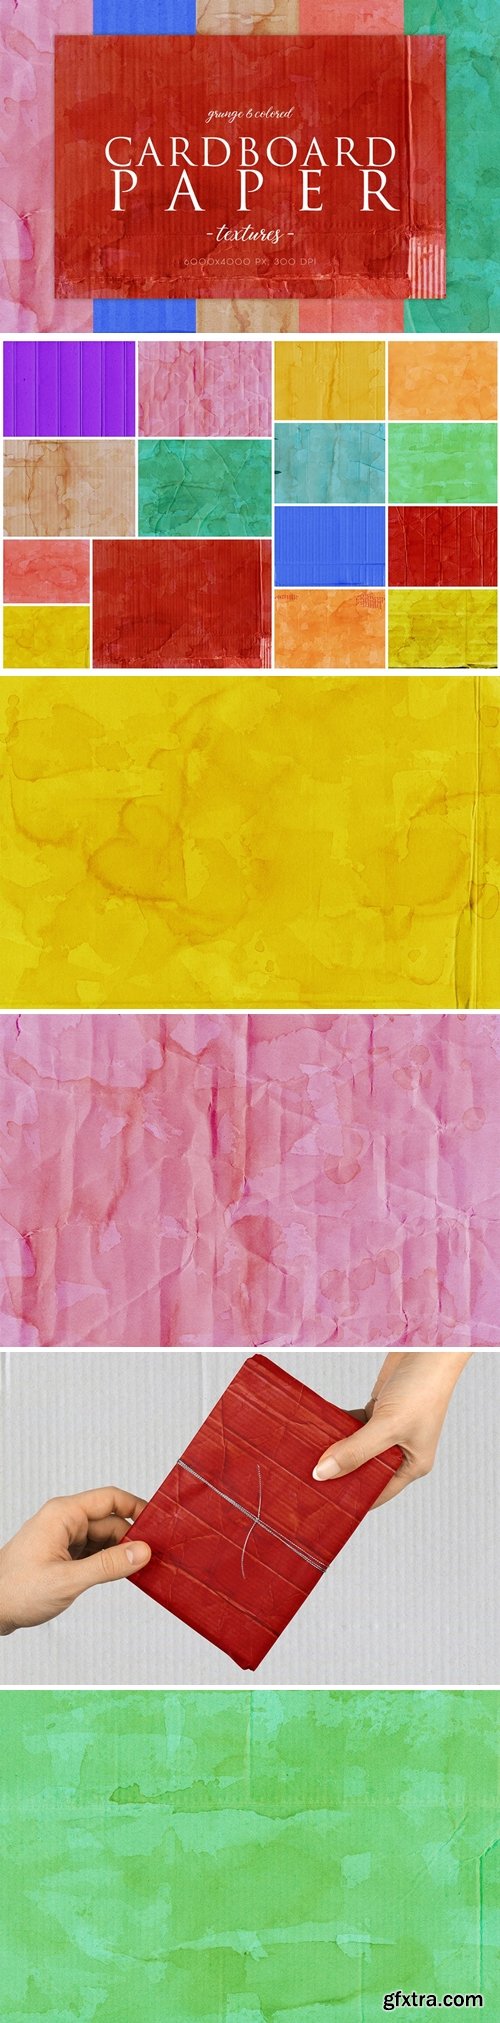 15 Colorful Cardboard Textures 2